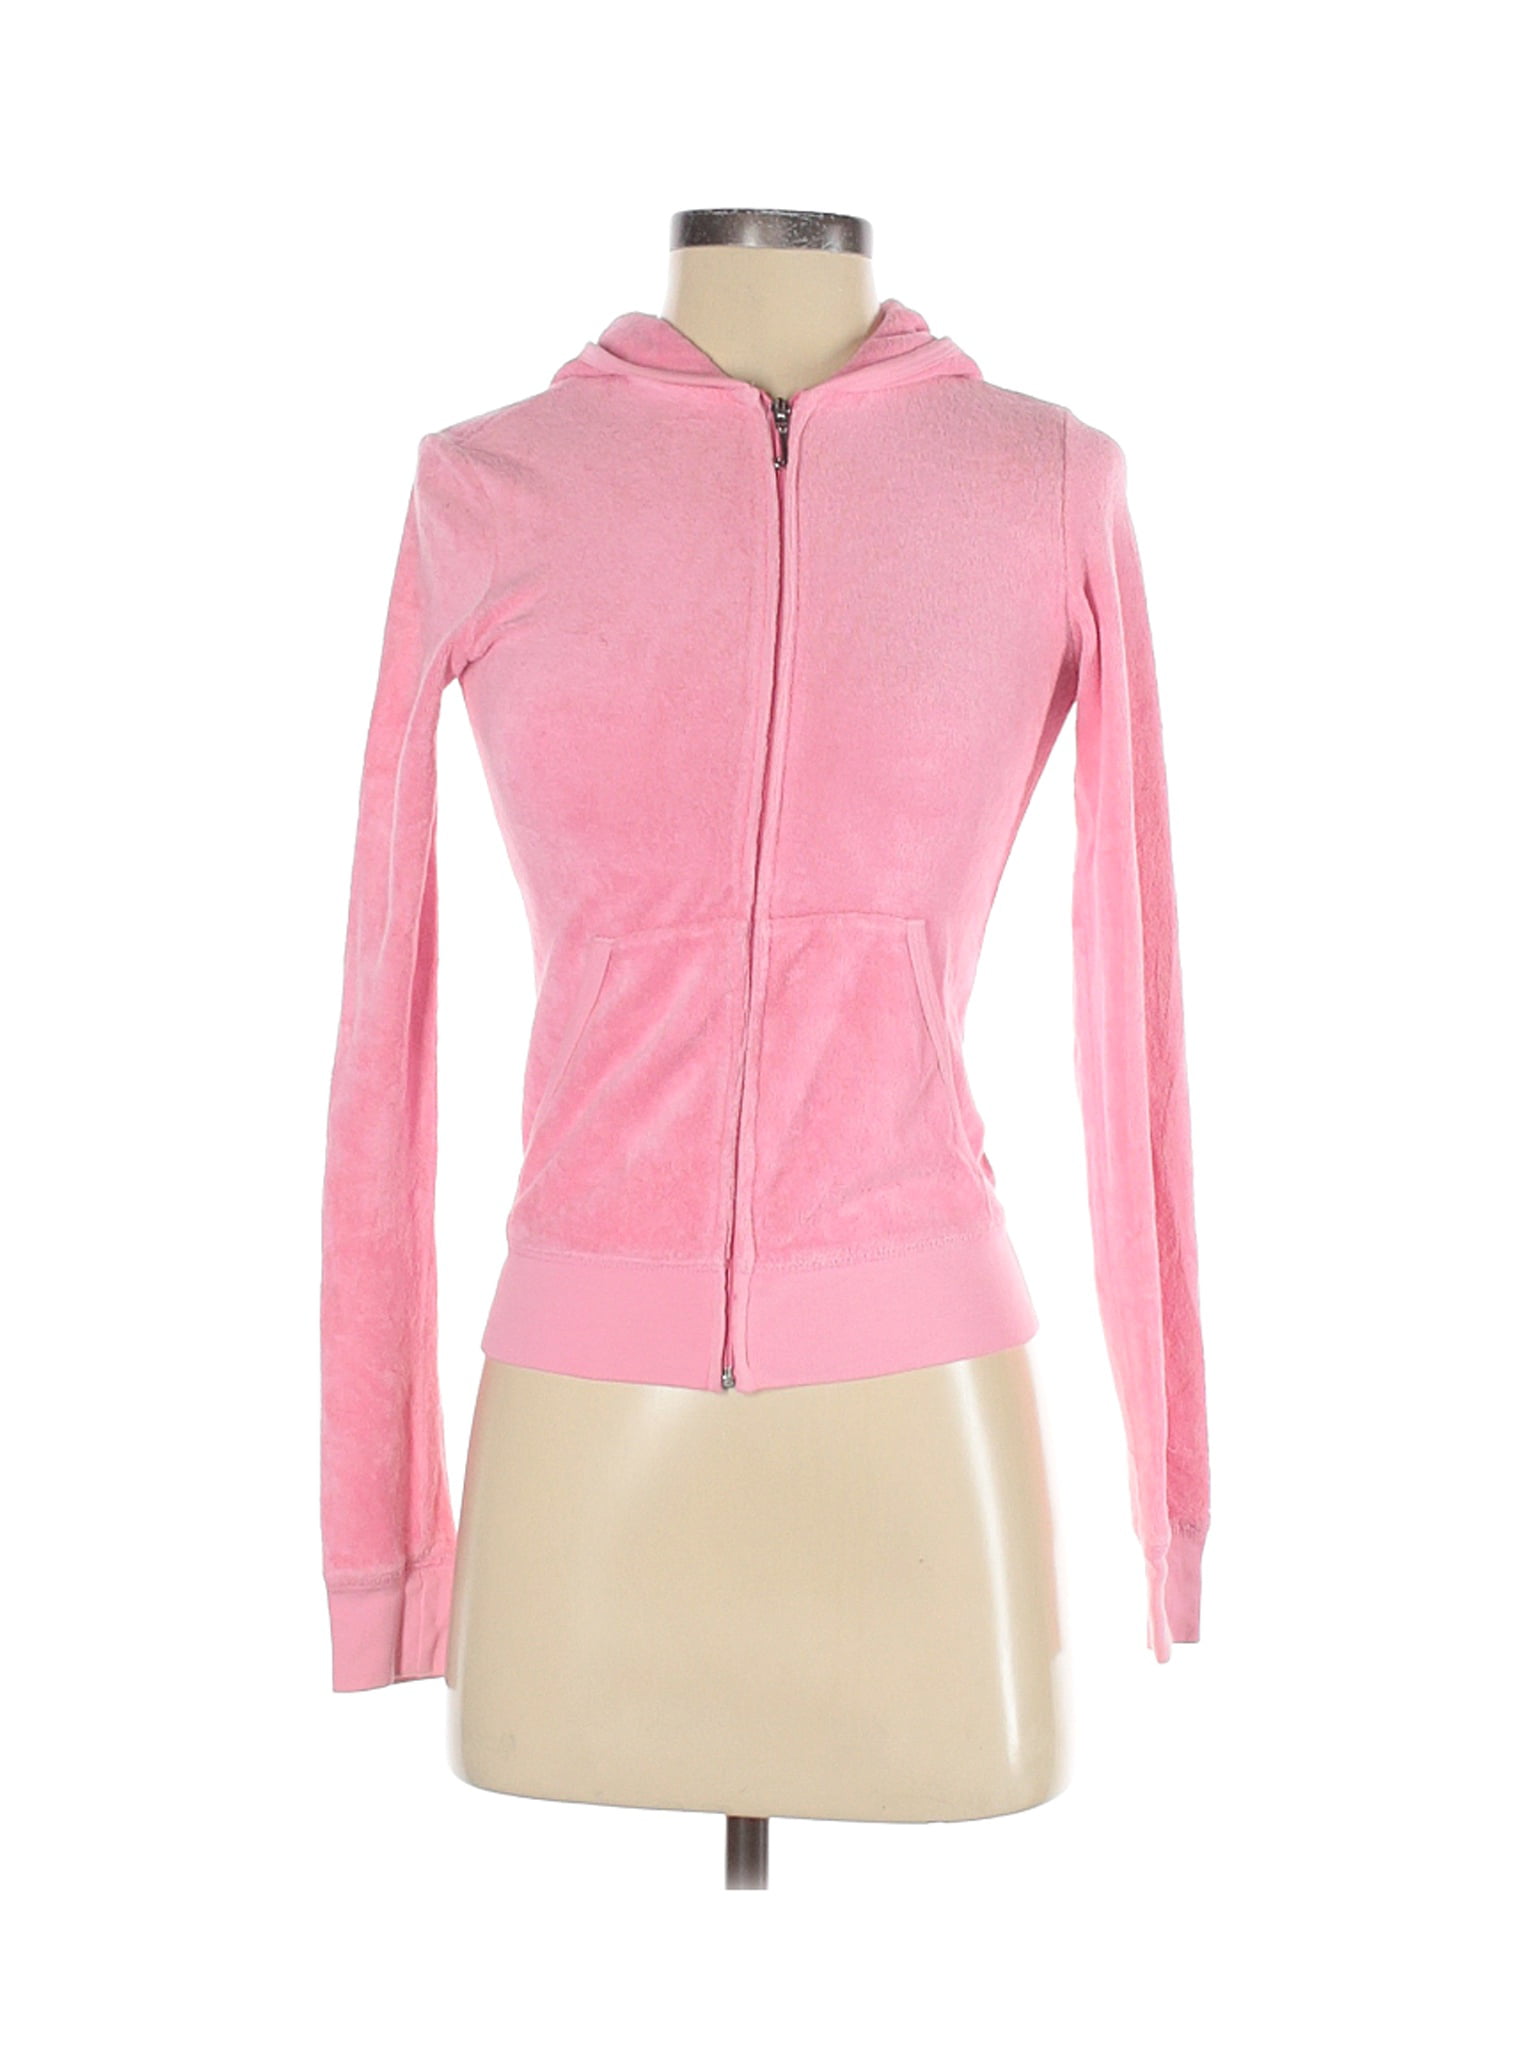 Juicy Couture - Pre-Owned Juicy Couture Women's Size P Zip Up Hoodie ...